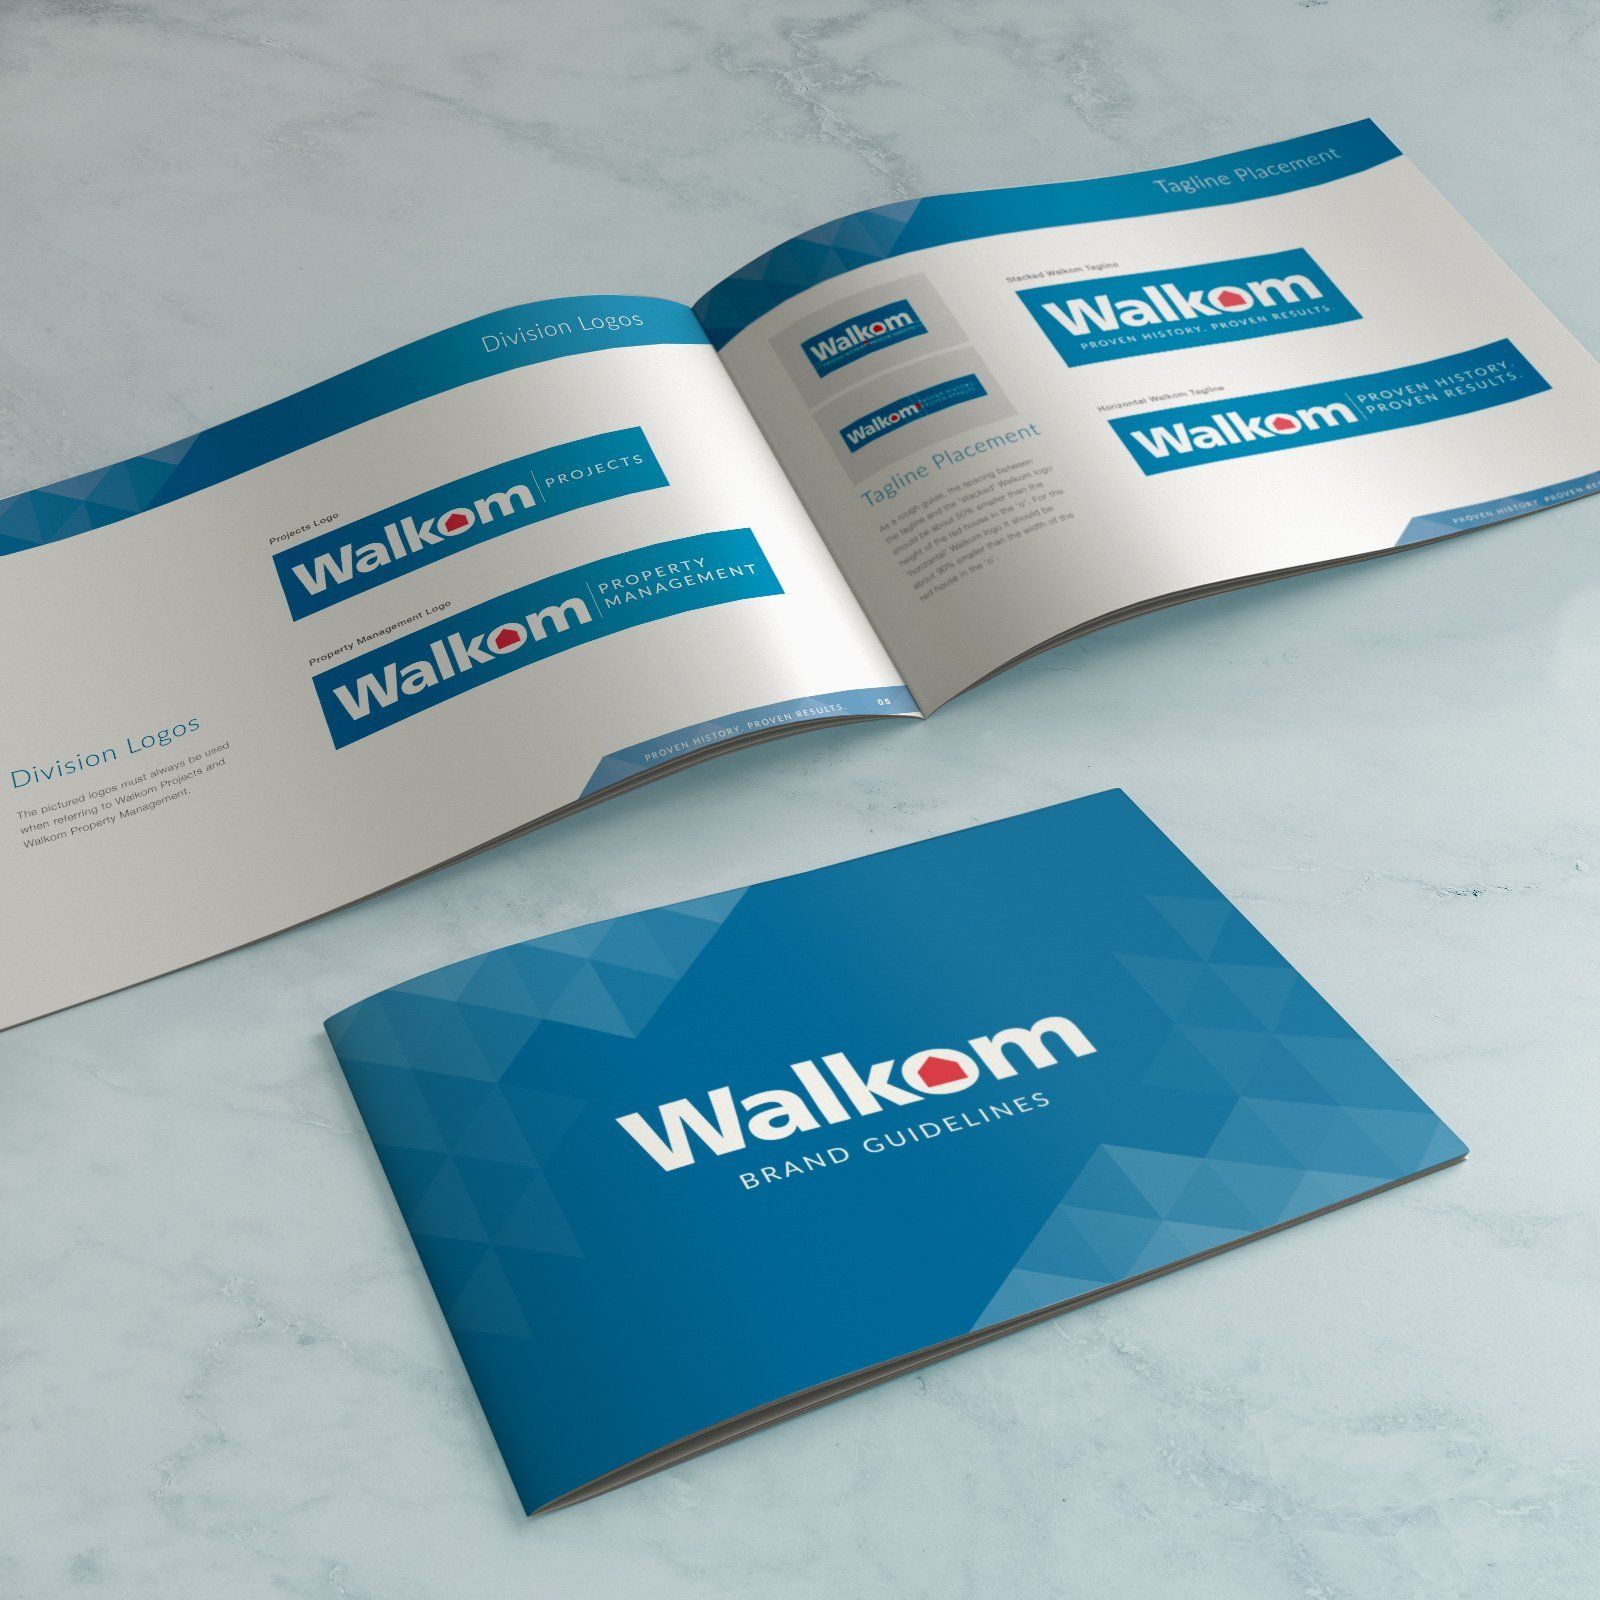 Walkom Real Estate Style Guide